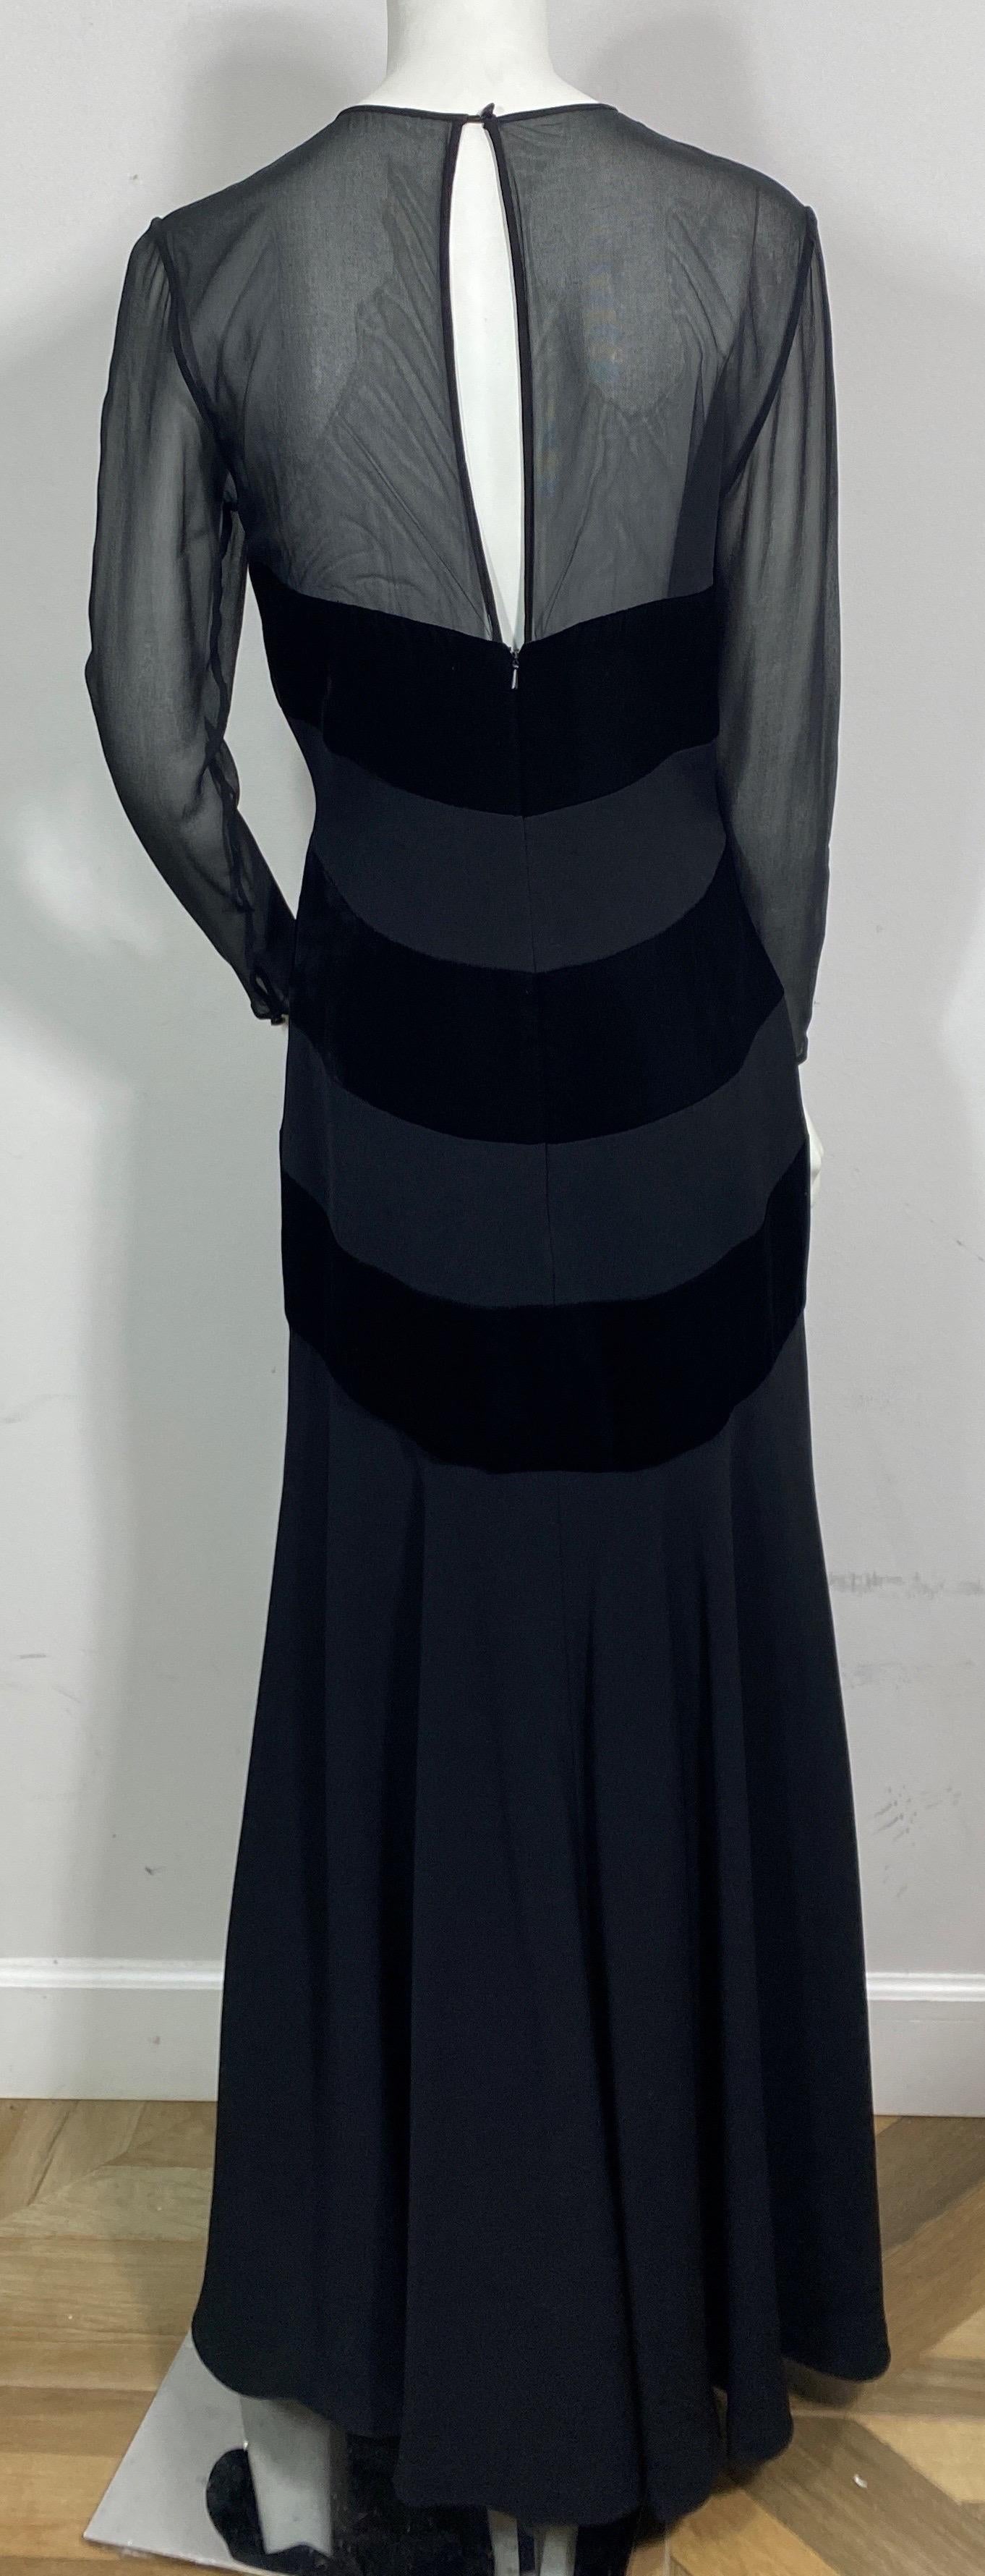 Bellville Sassoon 1990’s Black Long Sleeve Gown - Size 8 For Sale 3